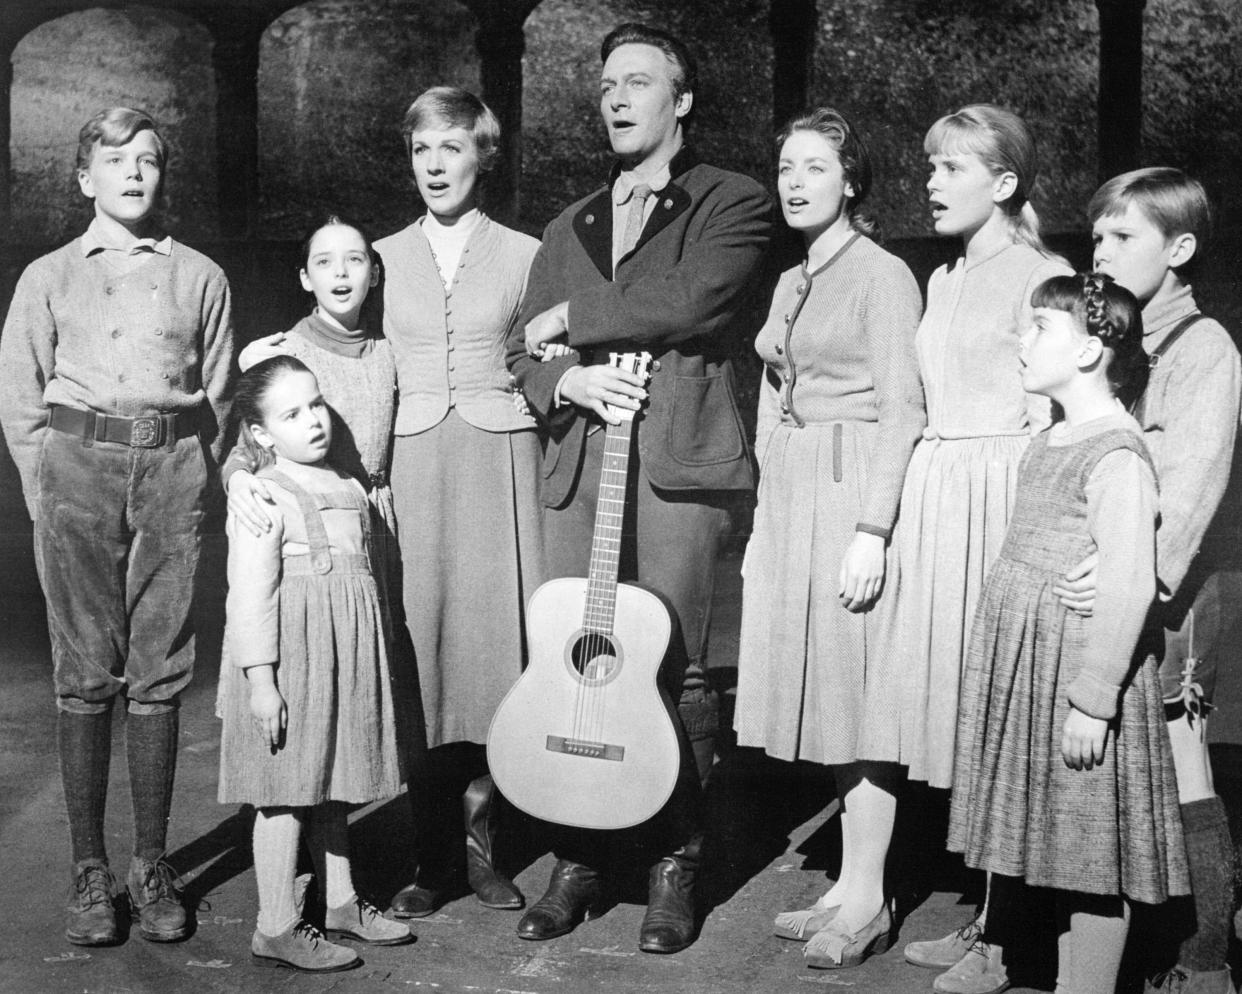 The actors playing members of the Von Trapp family in a promotional portrait for 'The Sound Of Music', directed by Robert Wise, 1965. Left to right: Nicholas Hammond as Friedrich, Kym Karath as Gretl, Angela Cartwright as Brigitta, Julie Andrews as Maria, Christopher Plummer as Captain Von Trapp, Charmian Carr as Liesl, Heather Menzies as Louisa, Debbie Turner as Marta and Duane Chase as Kurt. (Photo by Silver Screen Collection/Getty Images)